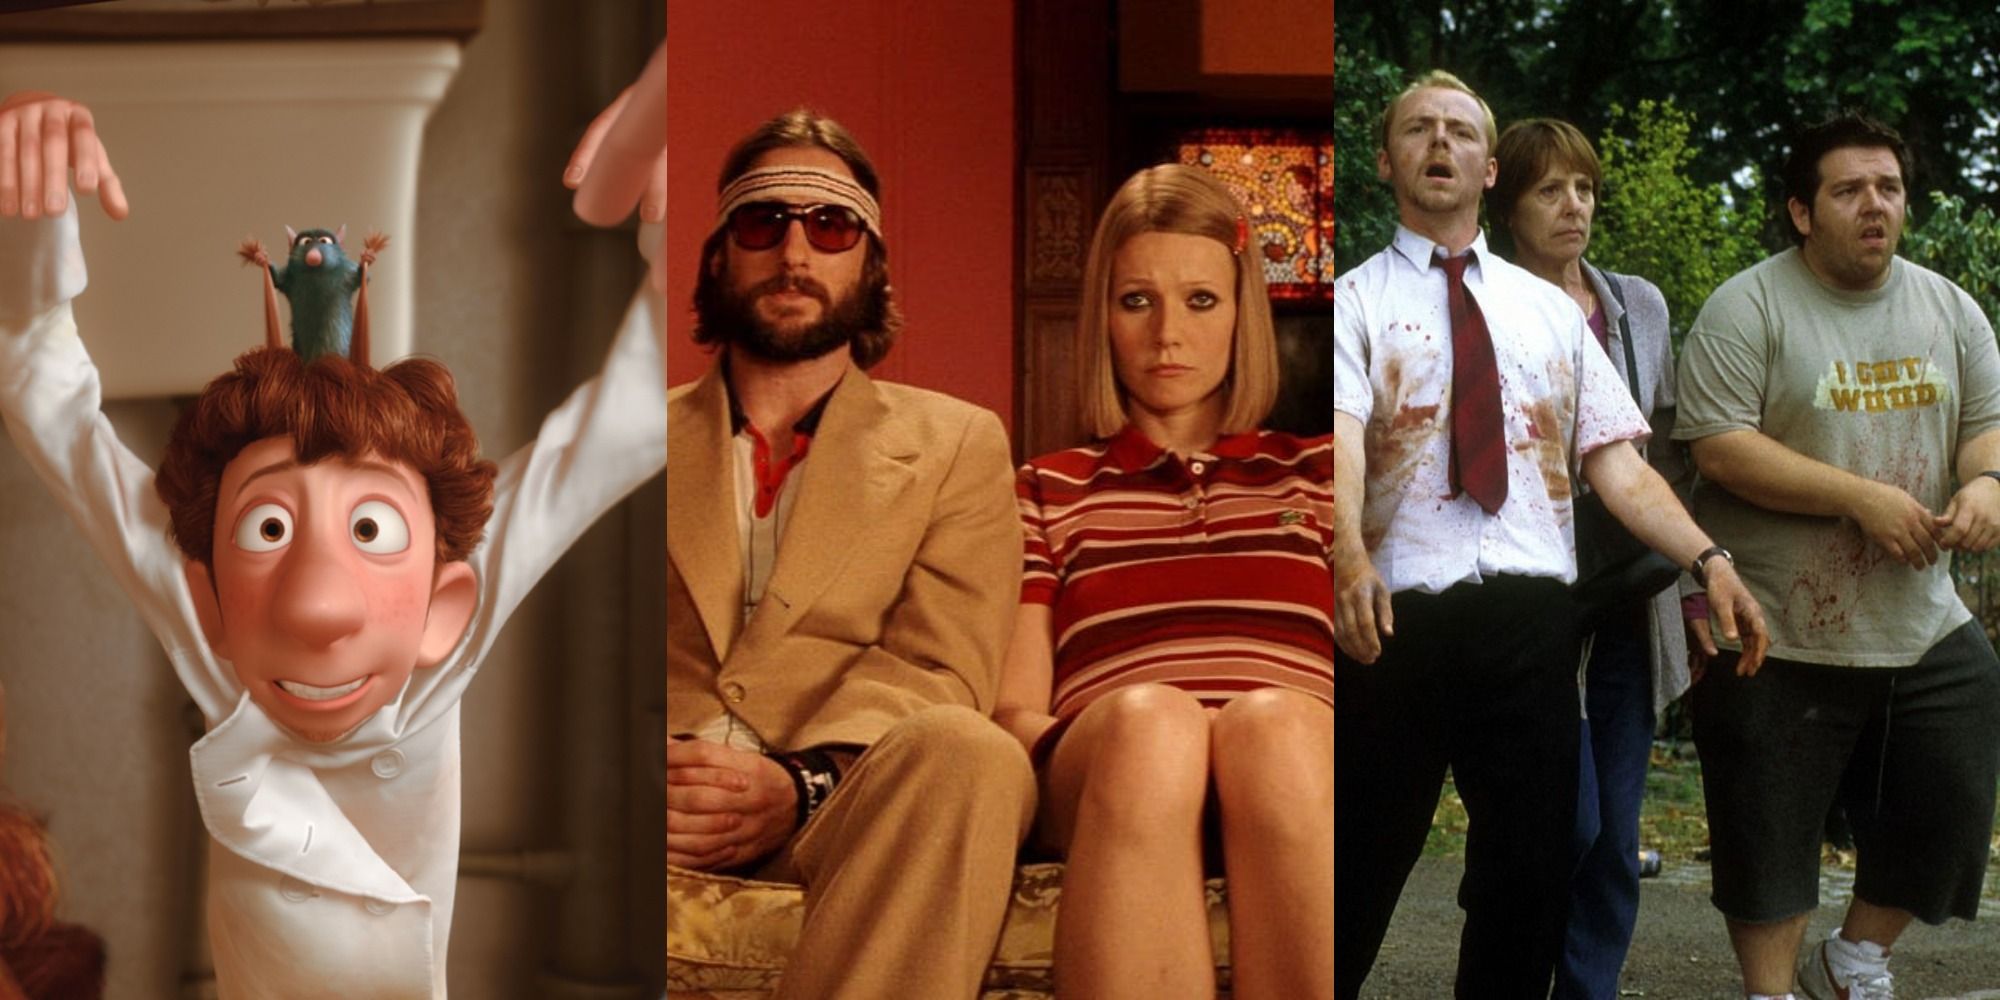 The 10 Best Comedy Movies Of The 2000s, According To Letterboxd